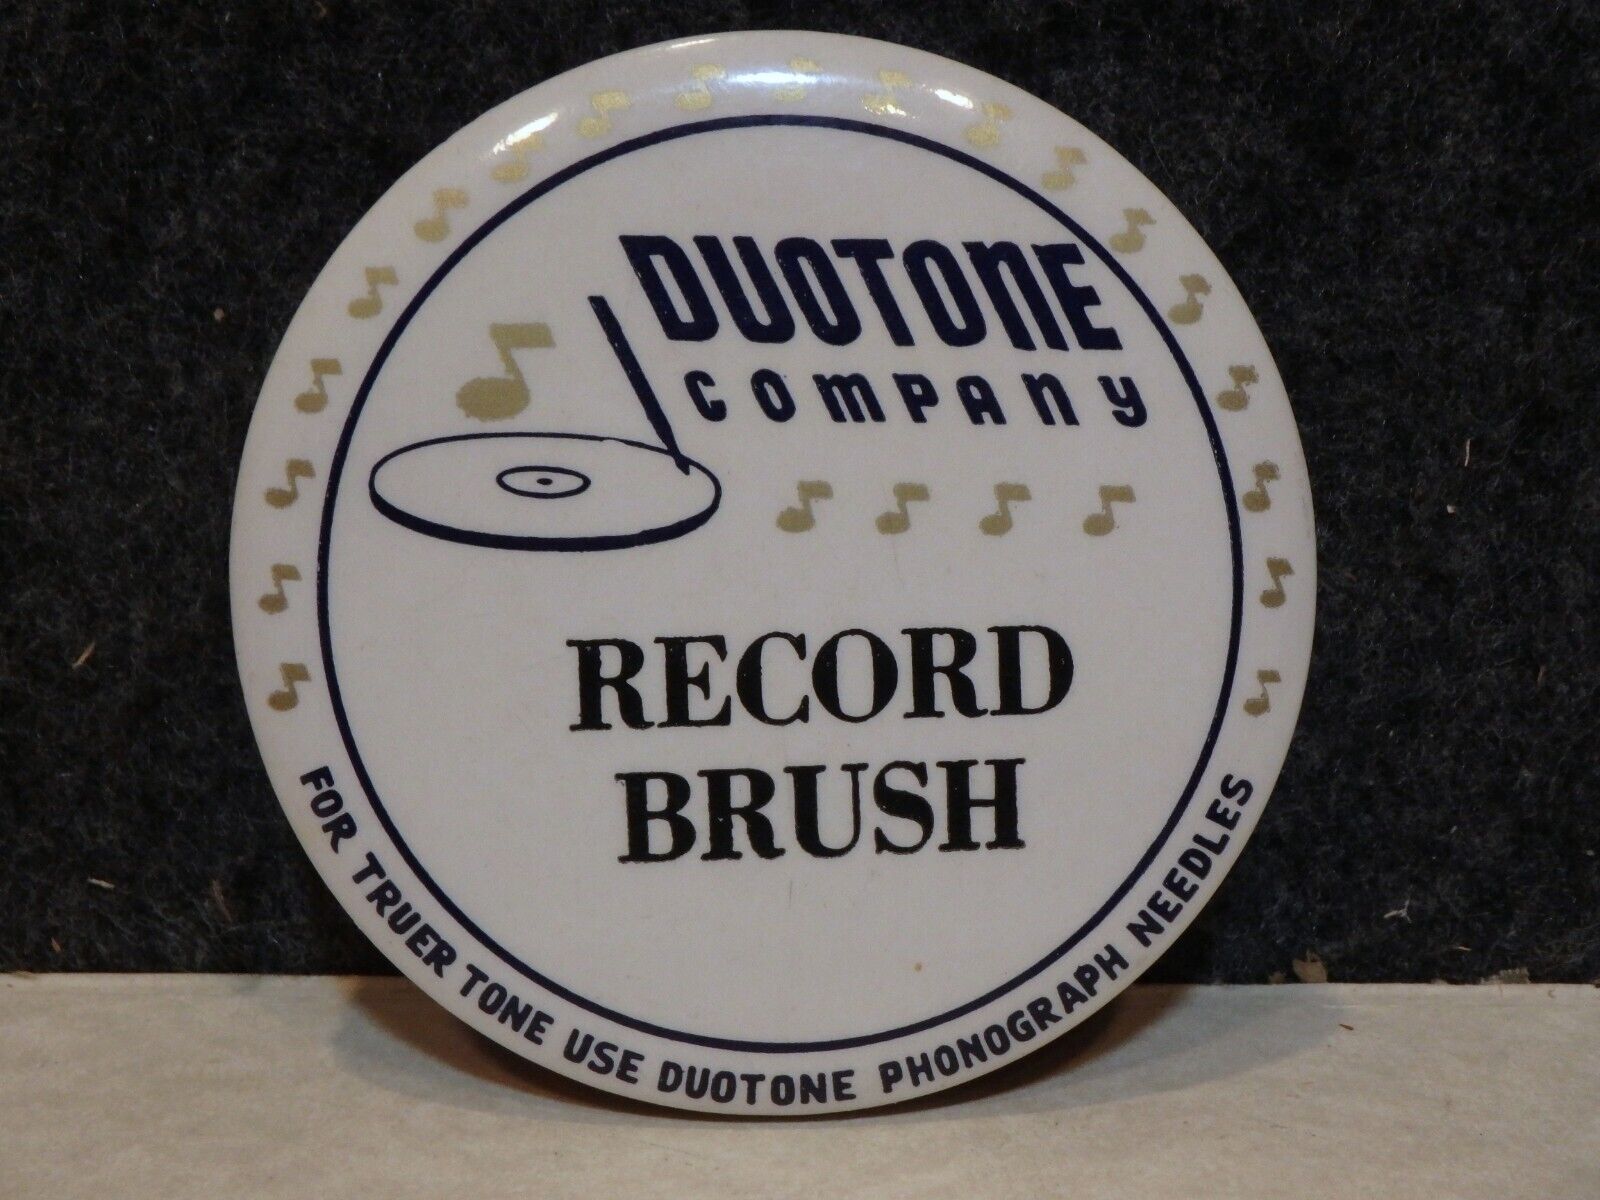 VINTAGE DUOTONE PHONOGRAPH NEEDLES ADVERTISING CELLULOID RECORD CLEANER BRUSH